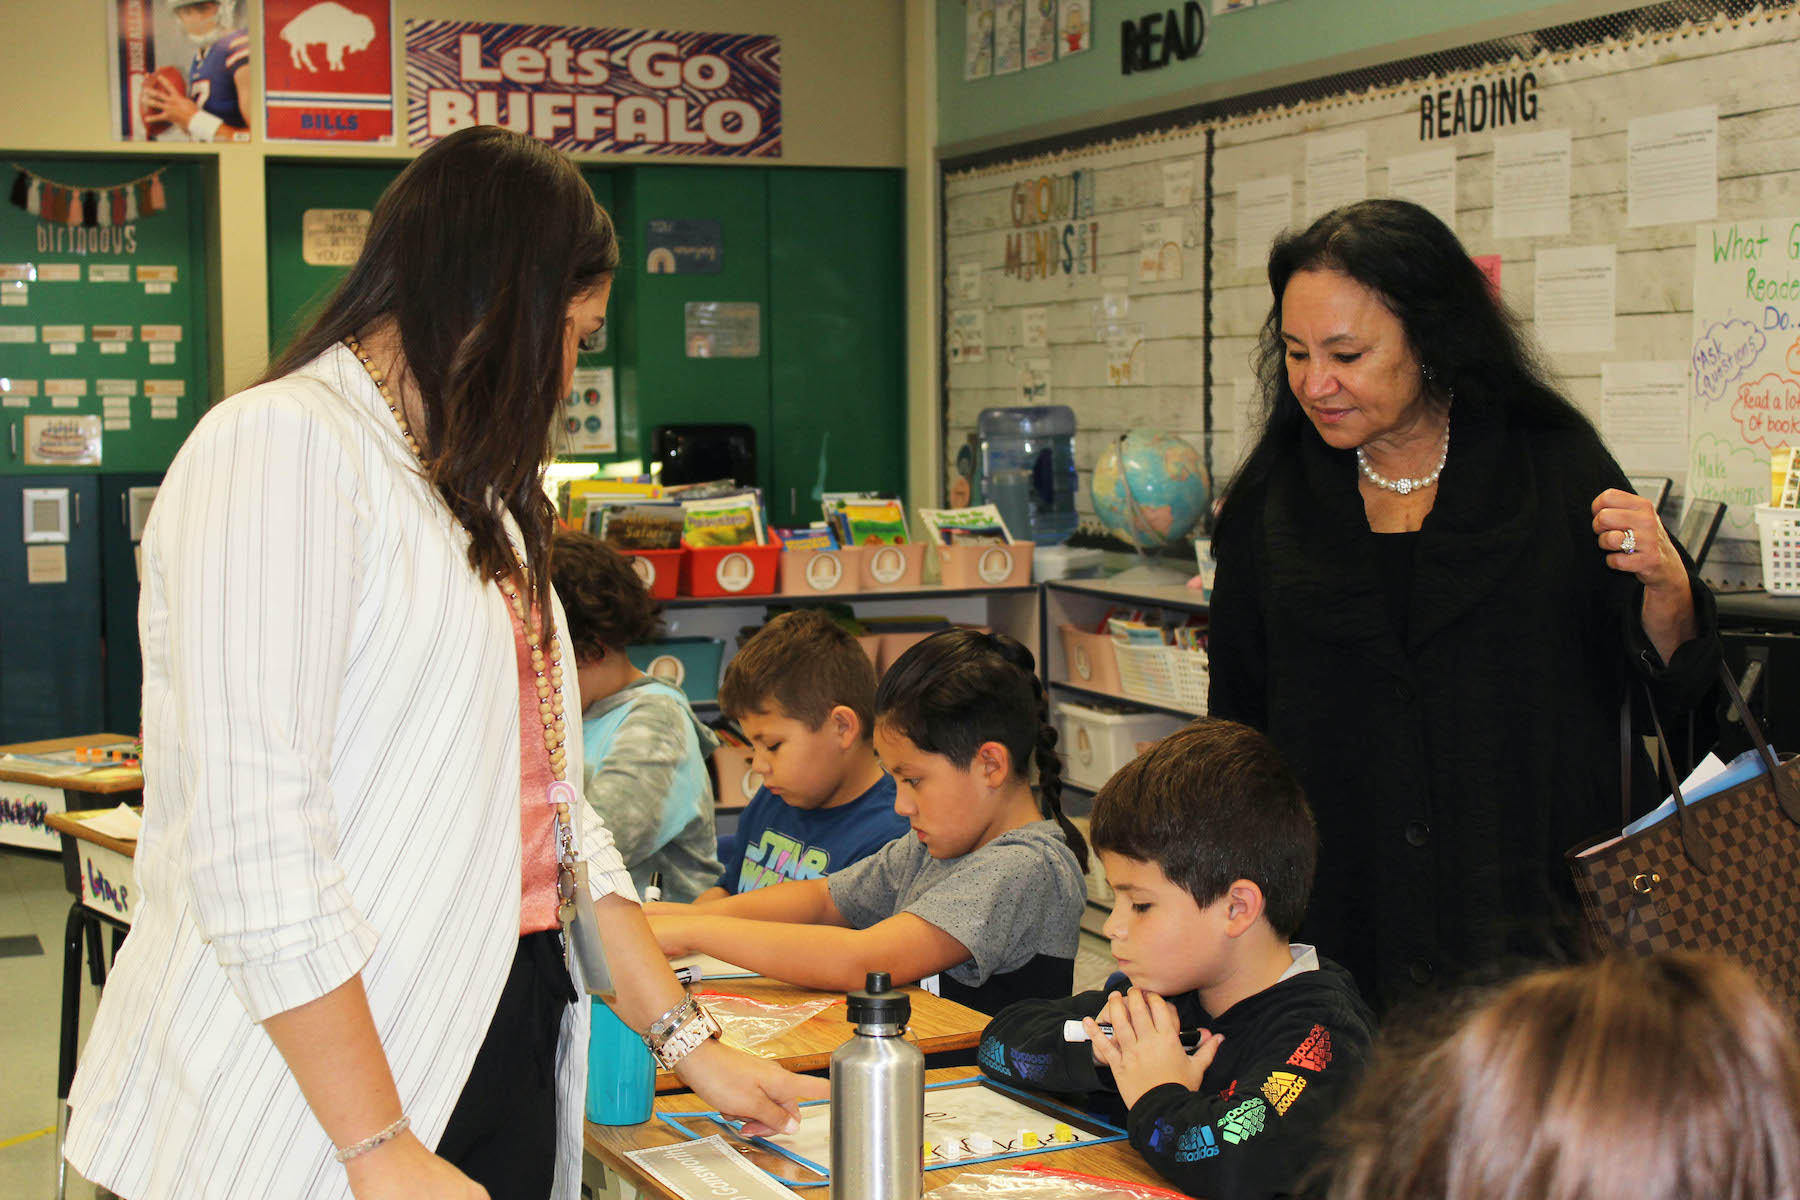 New York State Commissioner of Education Dr. Betty A. Rosa and members of the New York State Education Department participated in a class visit.